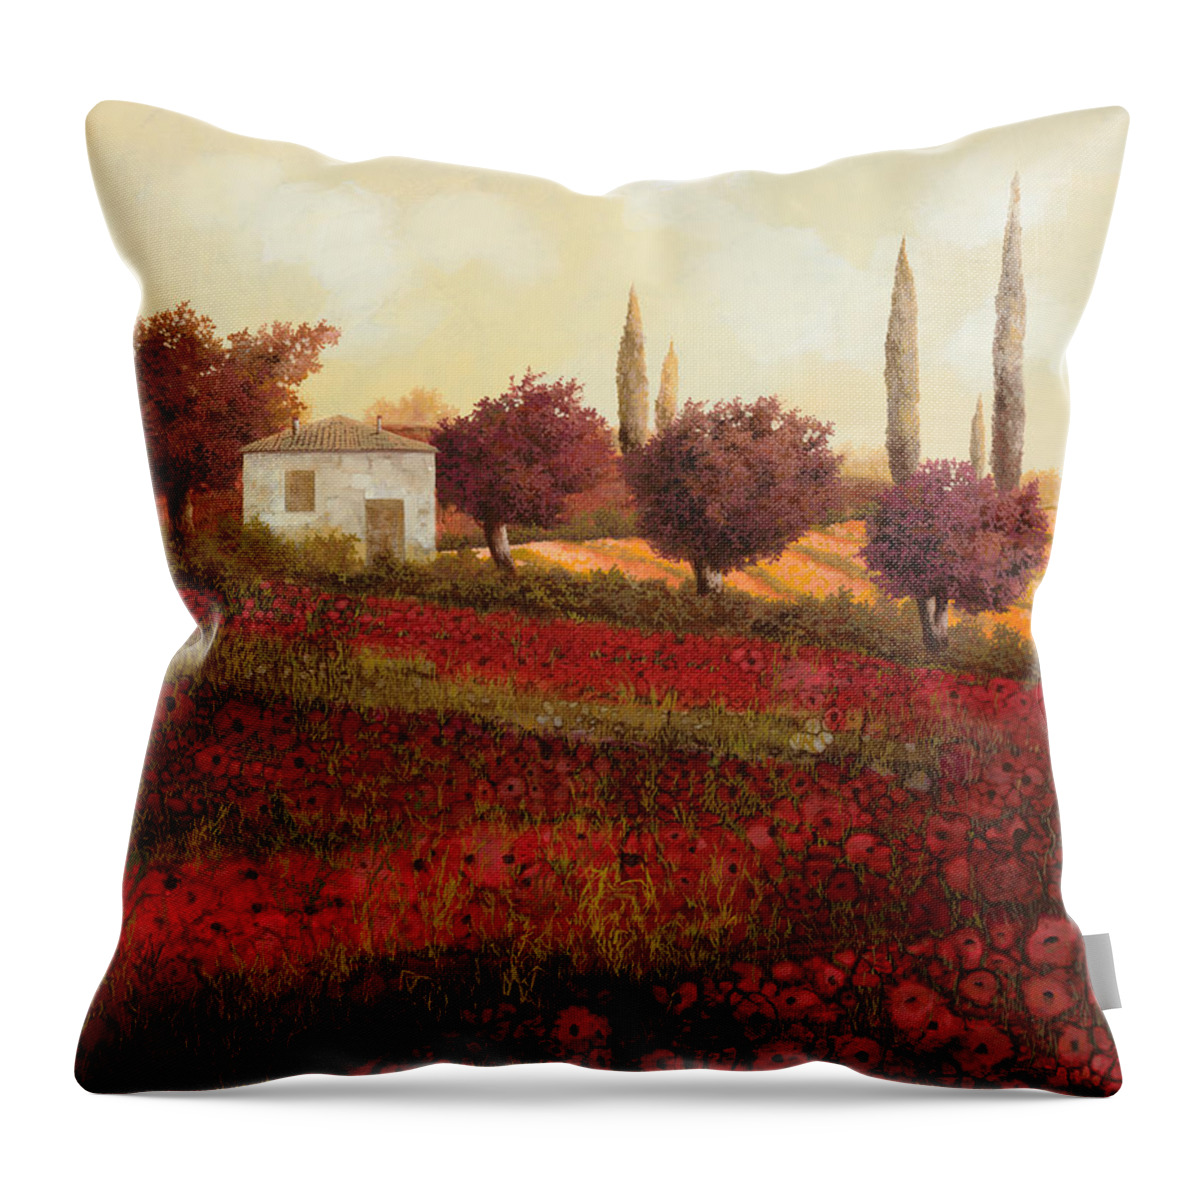 Tuscany Throw Pillow featuring the painting Papaveri In Toscana by Guido Borelli